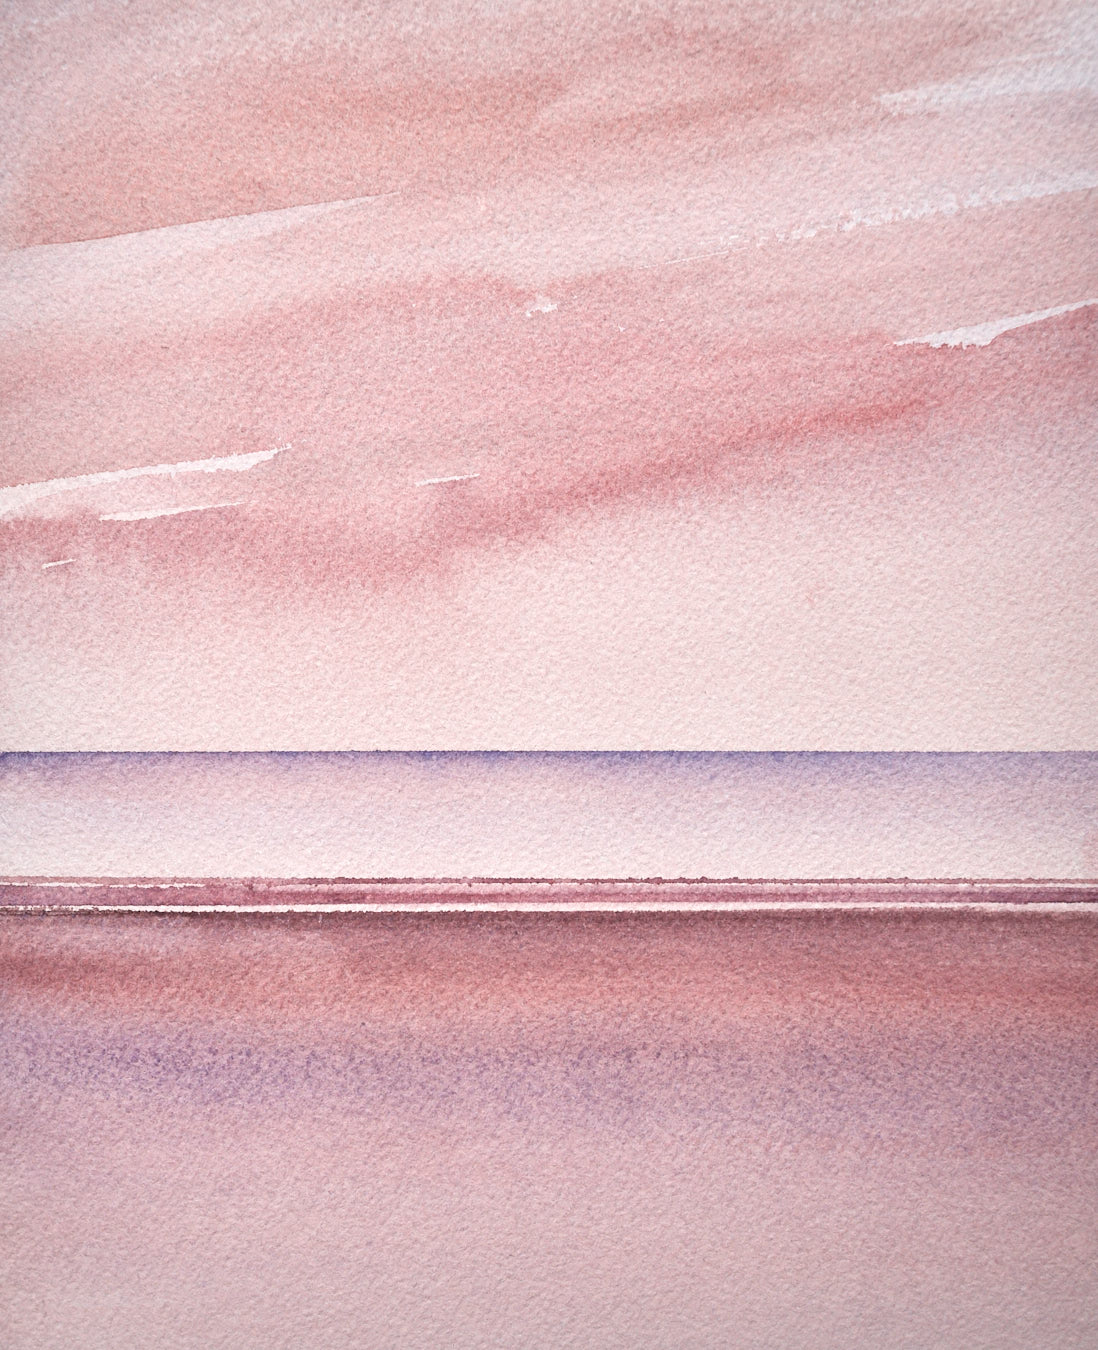 Large image of Late light, St Annes-on-sea original watercolour painting